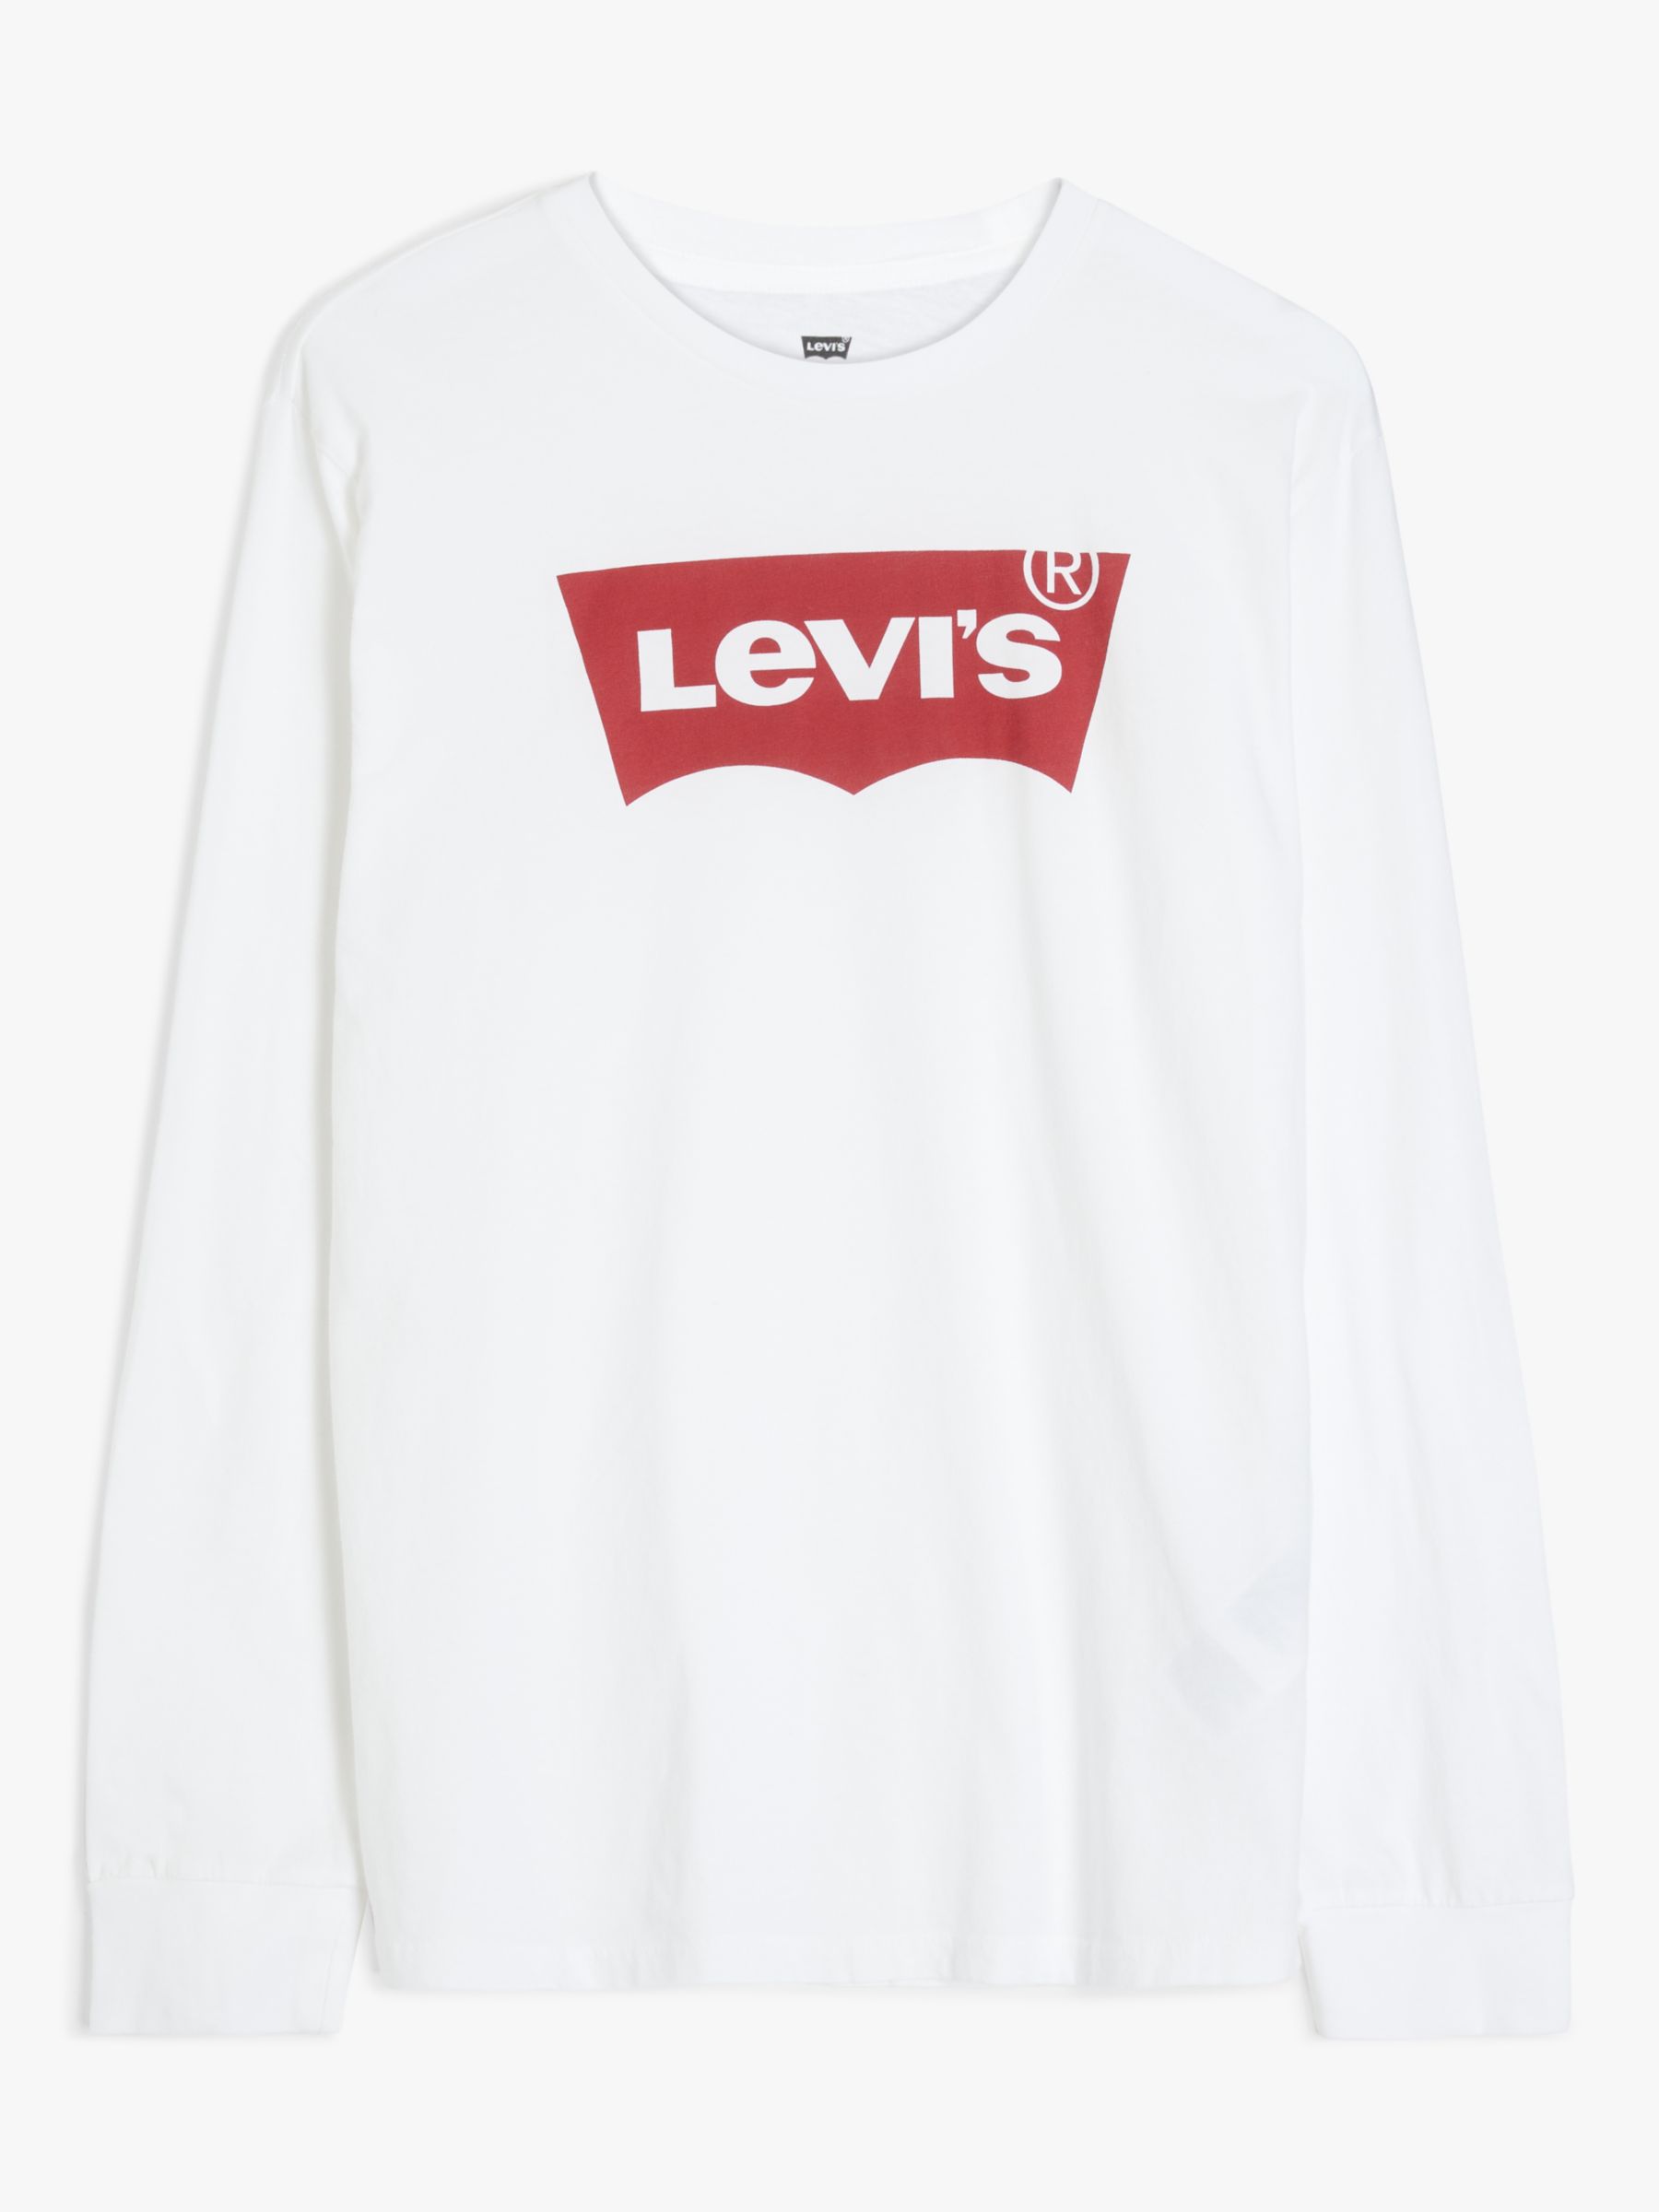 Levi's White Red Bat Wing Logo Classic Short Sleeve T-Shirt Youth Size L